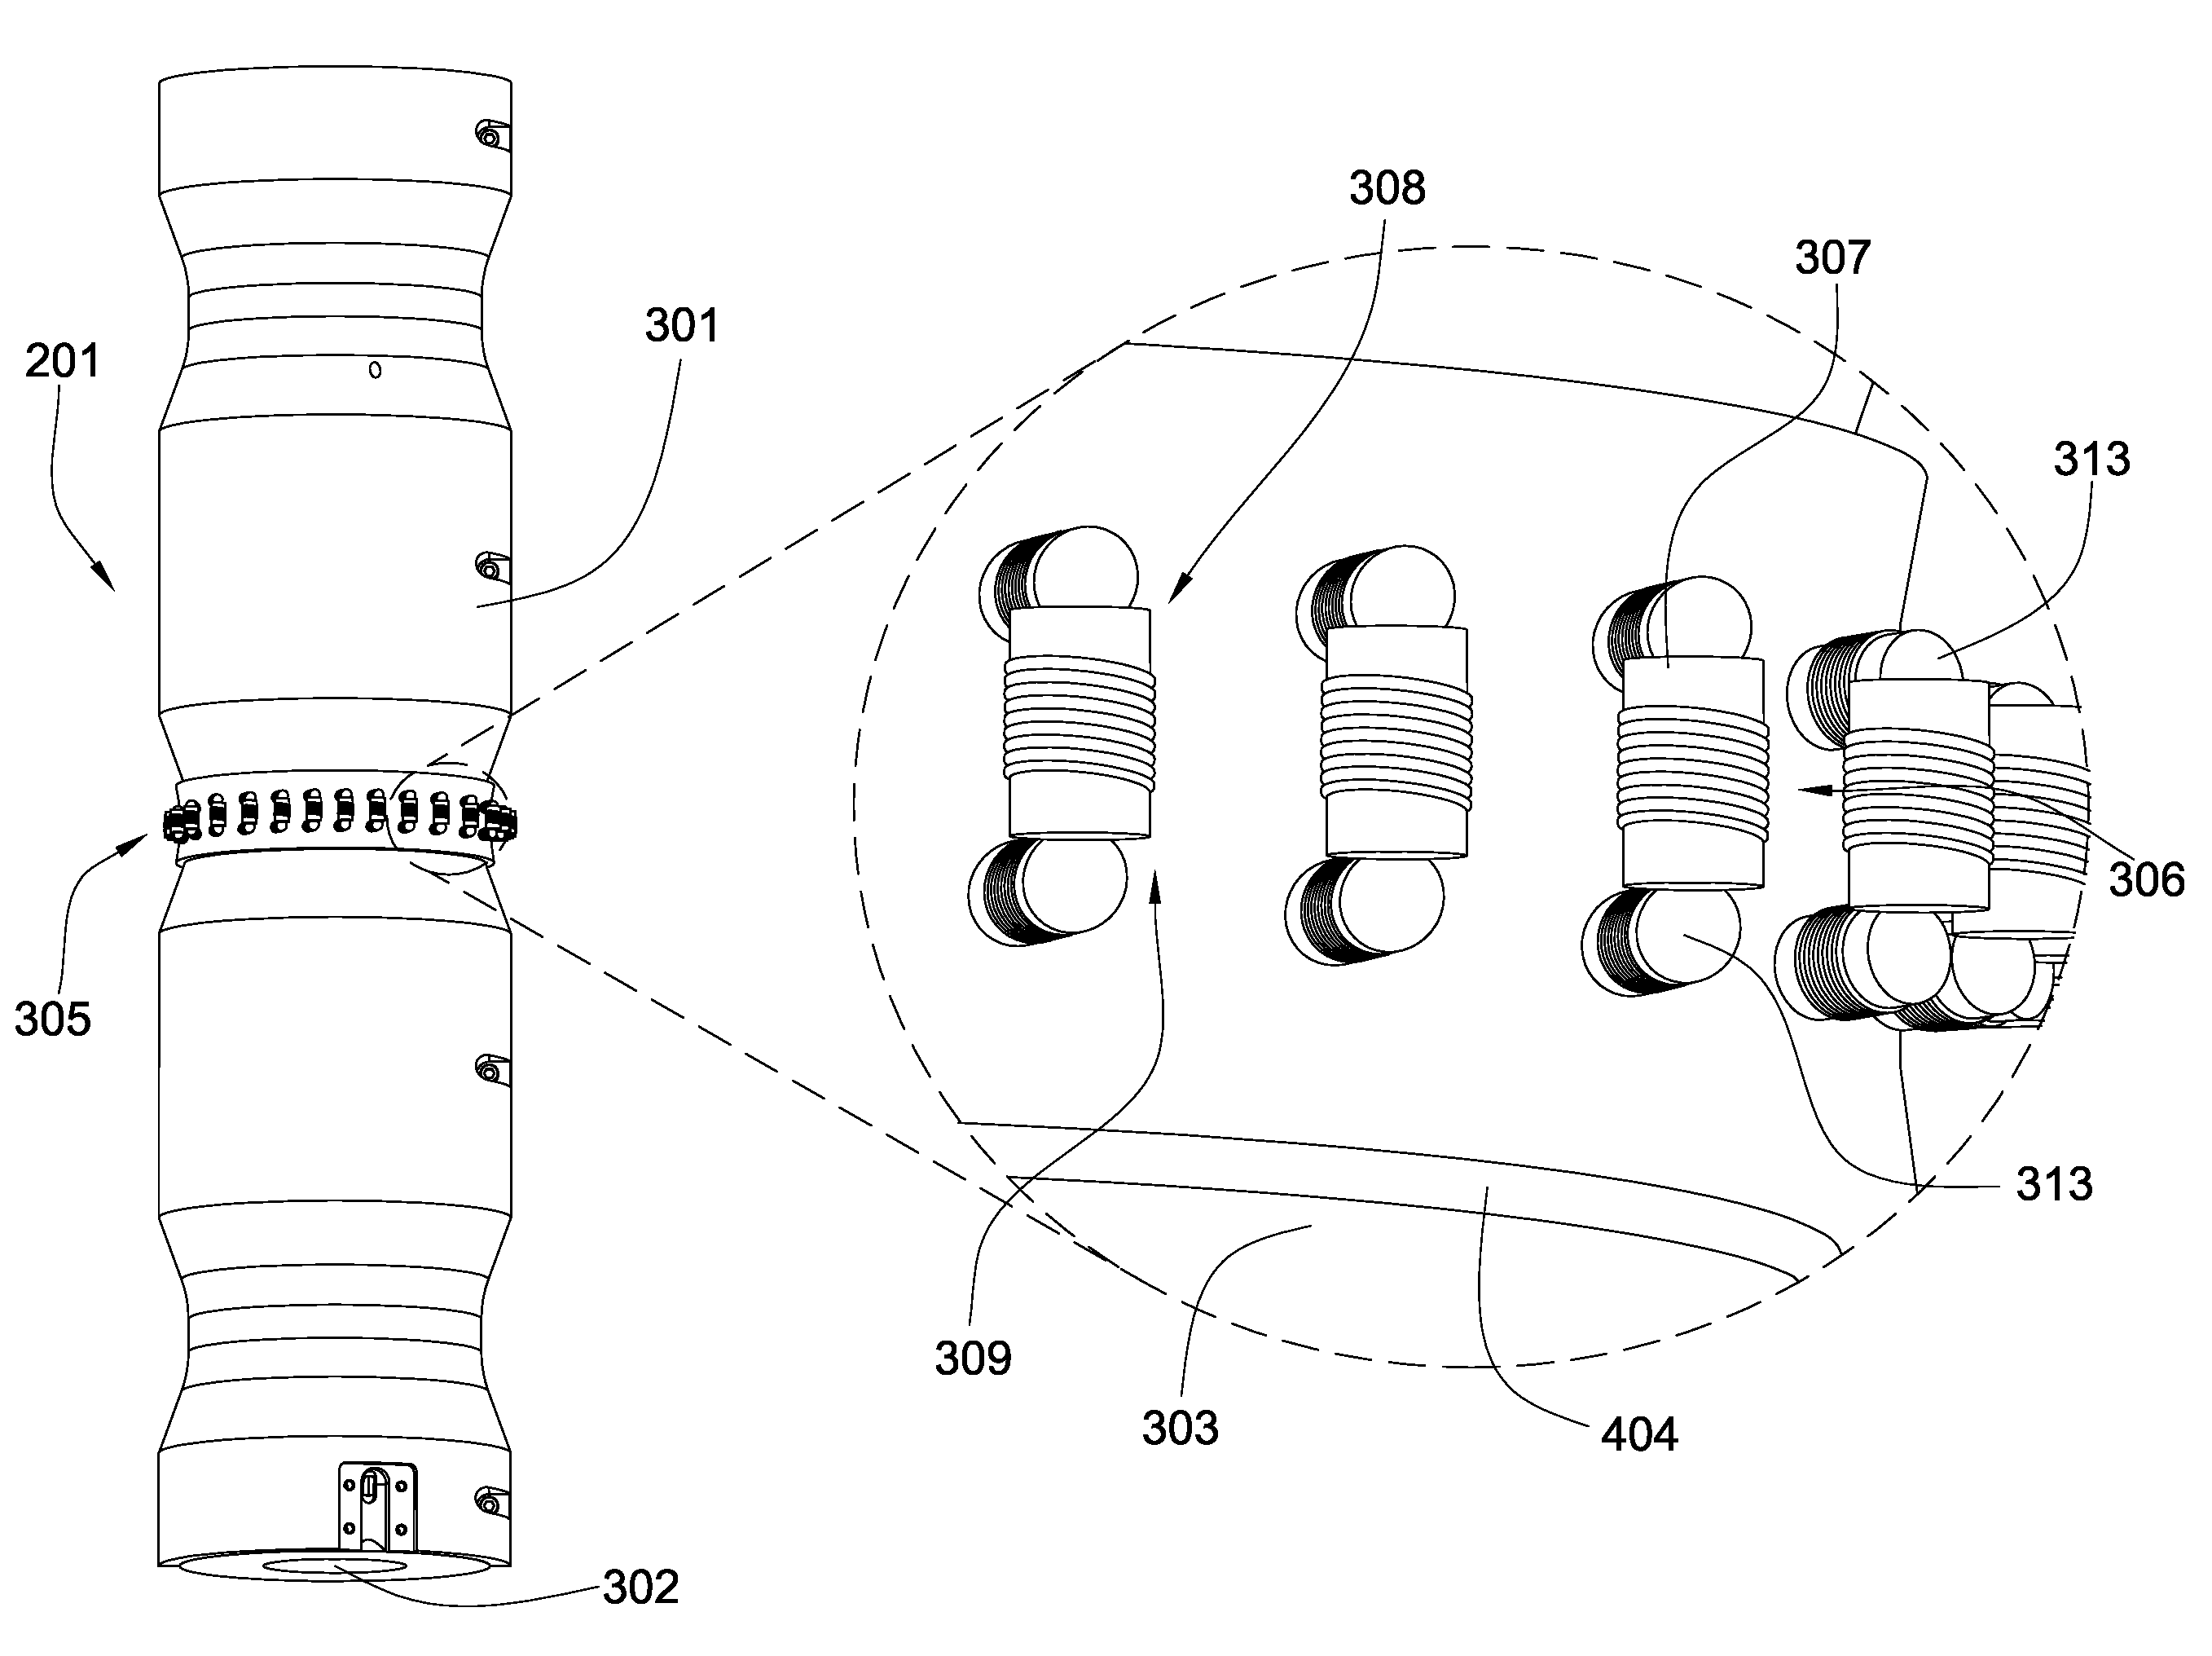 Externally guided and directed field induction resistivity tool